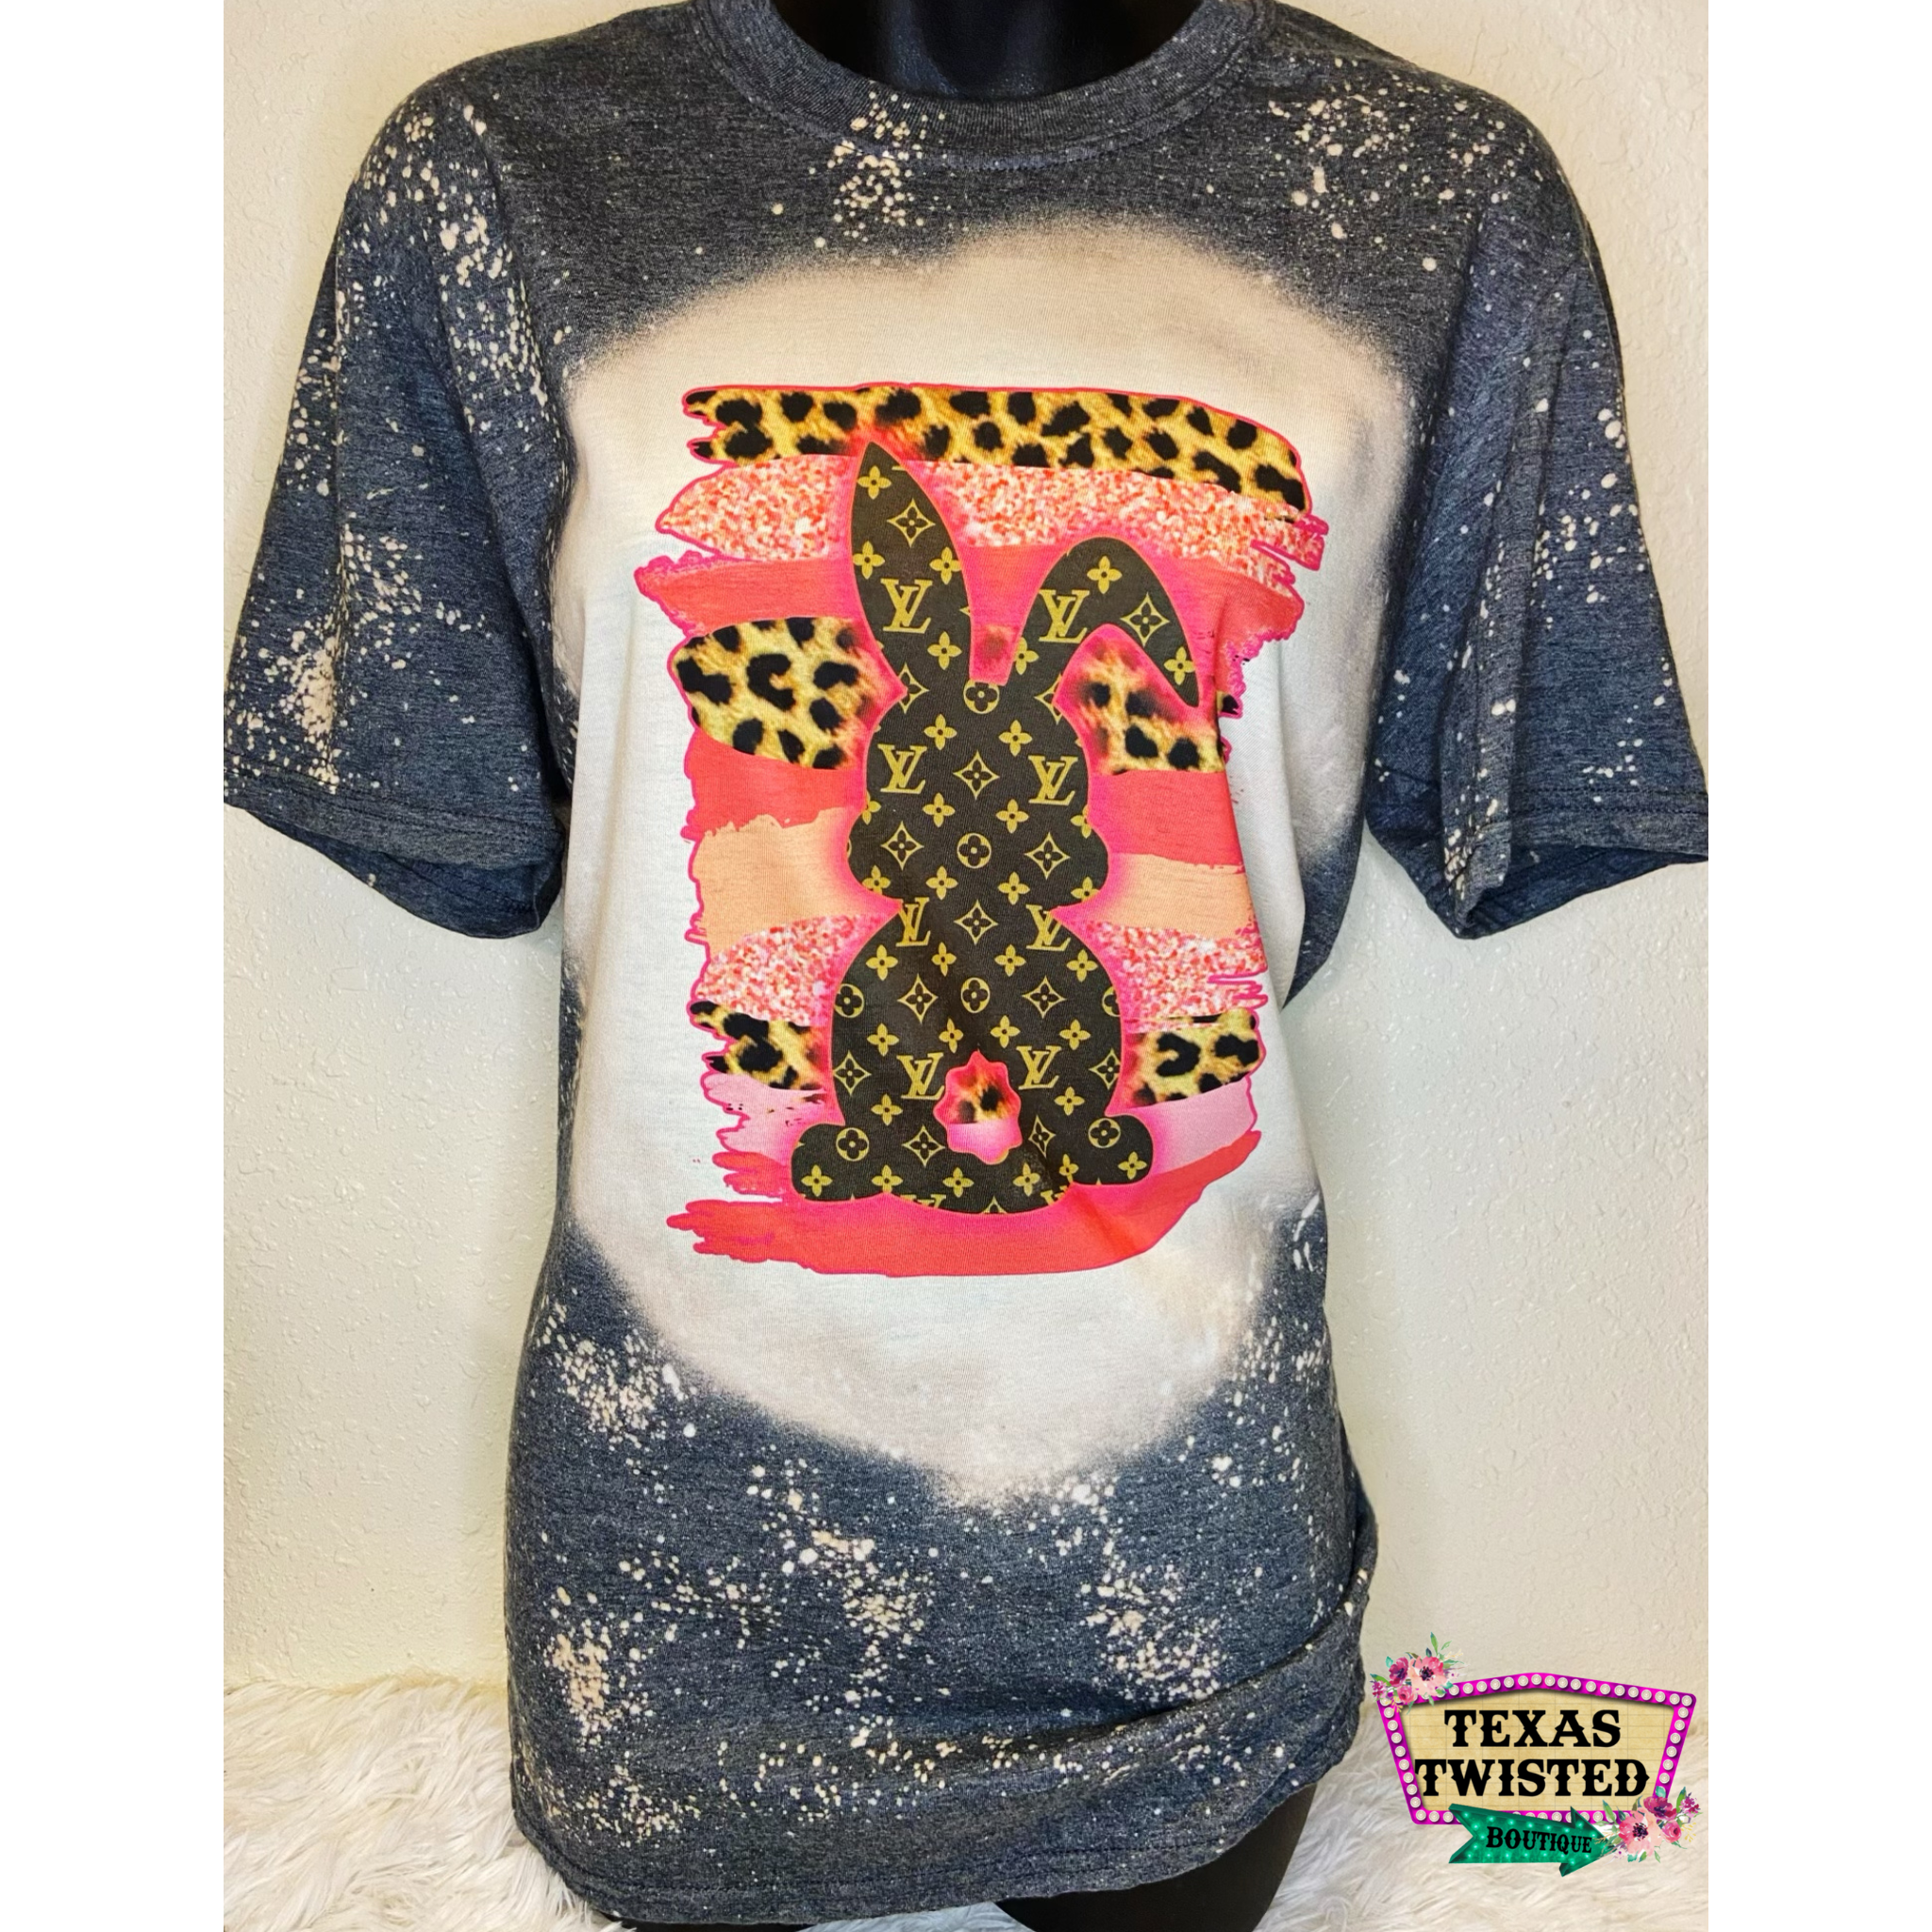 Texas Twisted Boutique Classic LV Drip Graphic Tee